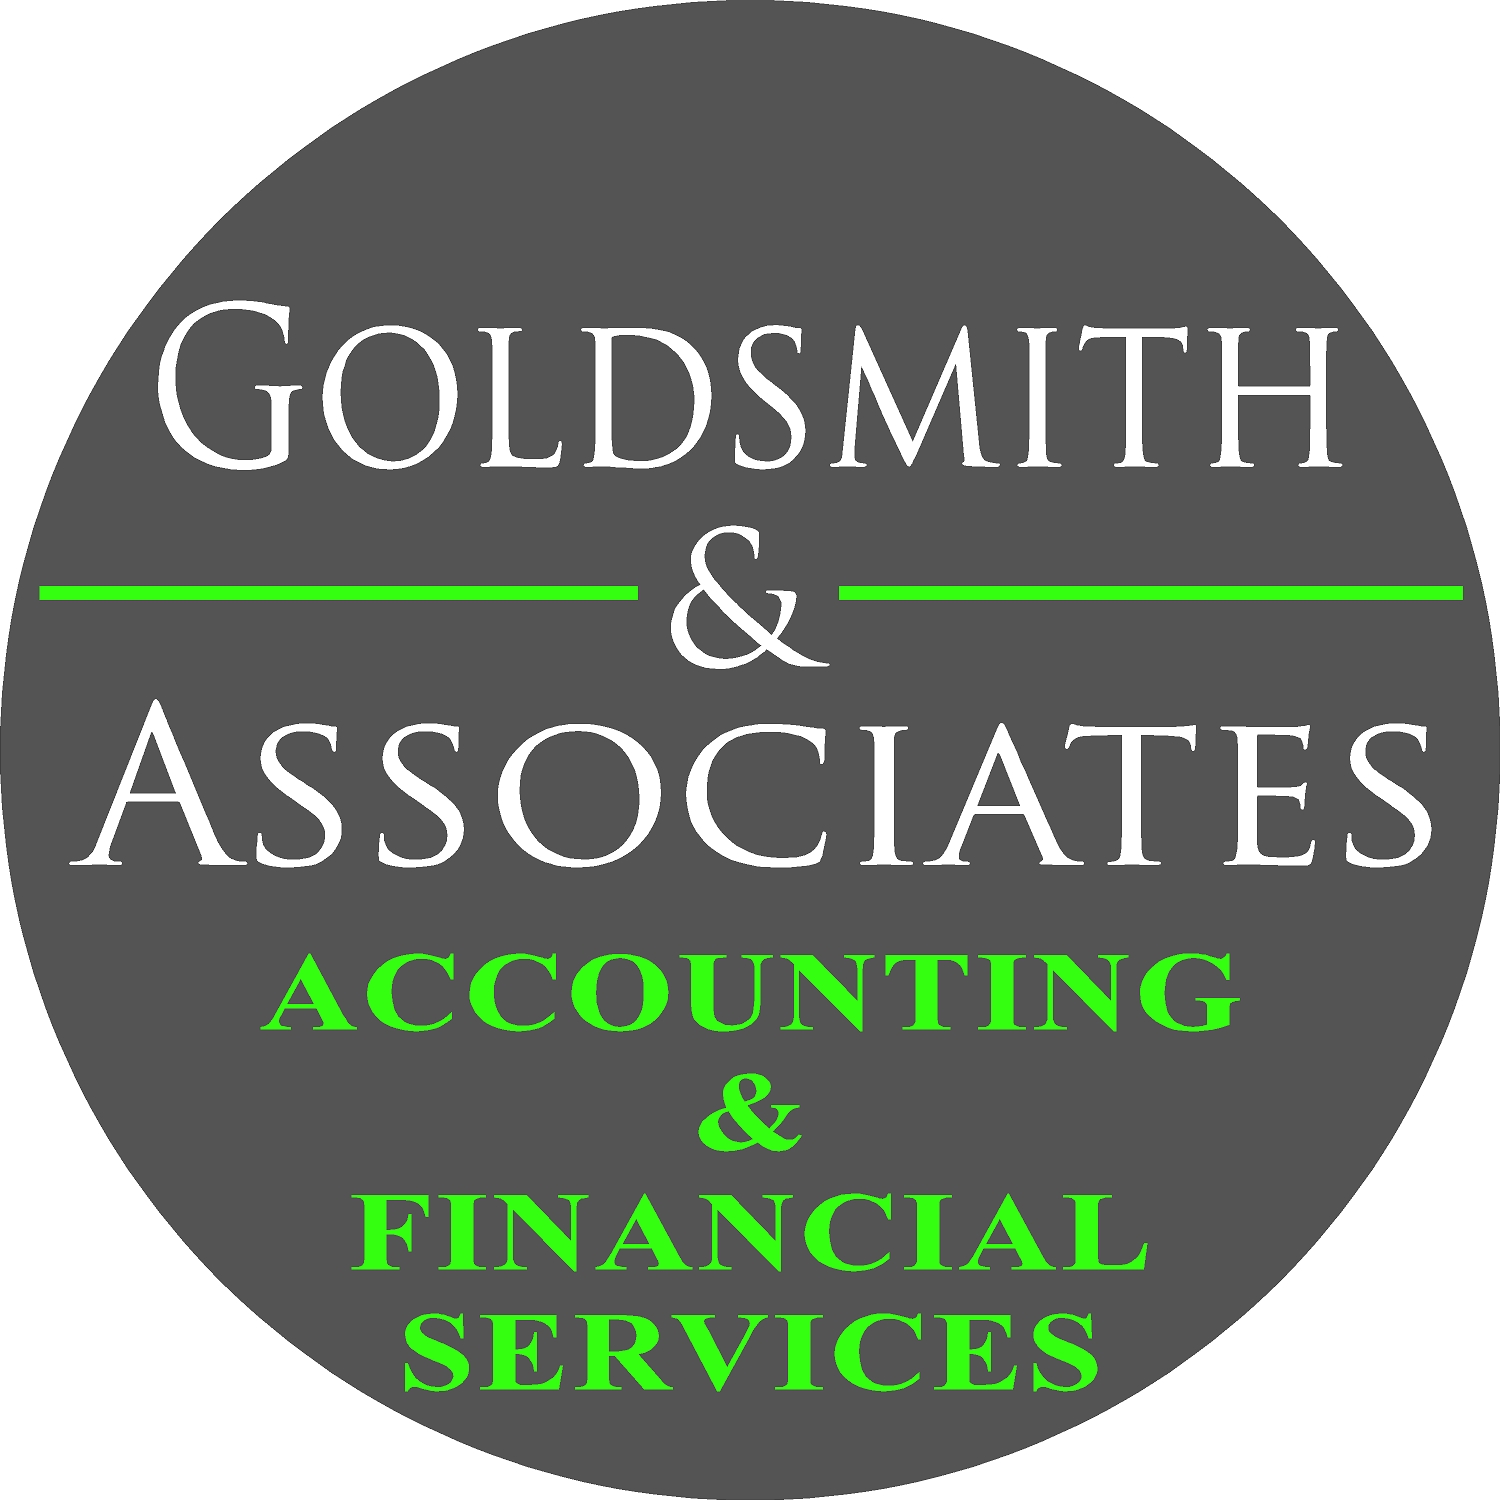 Goldsmith & Associates Accounting and Financial Services Logo